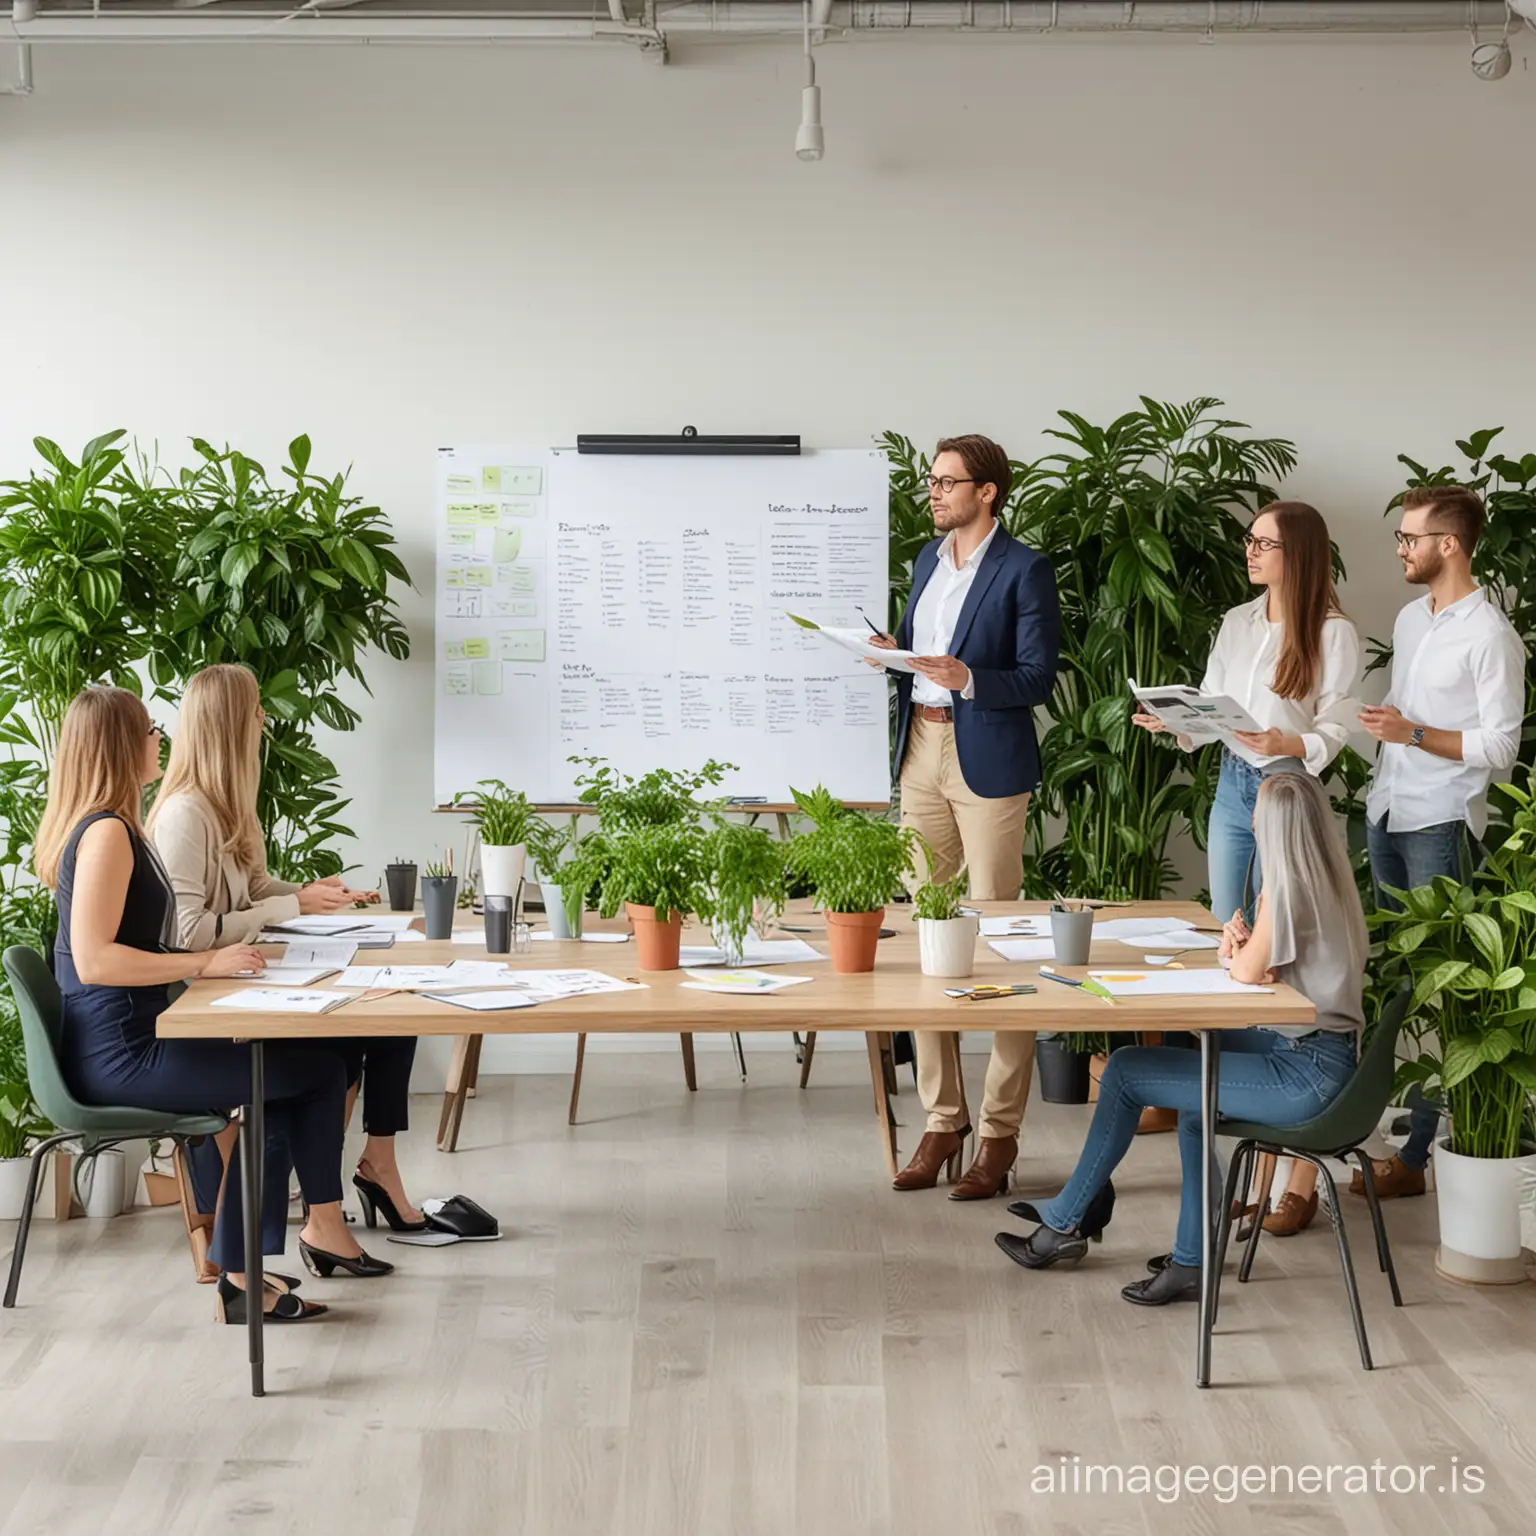 10 people, standing, creative office. business casual clothes. Notebooks on tables. Flipcharts. One Person presenting. Green plants background